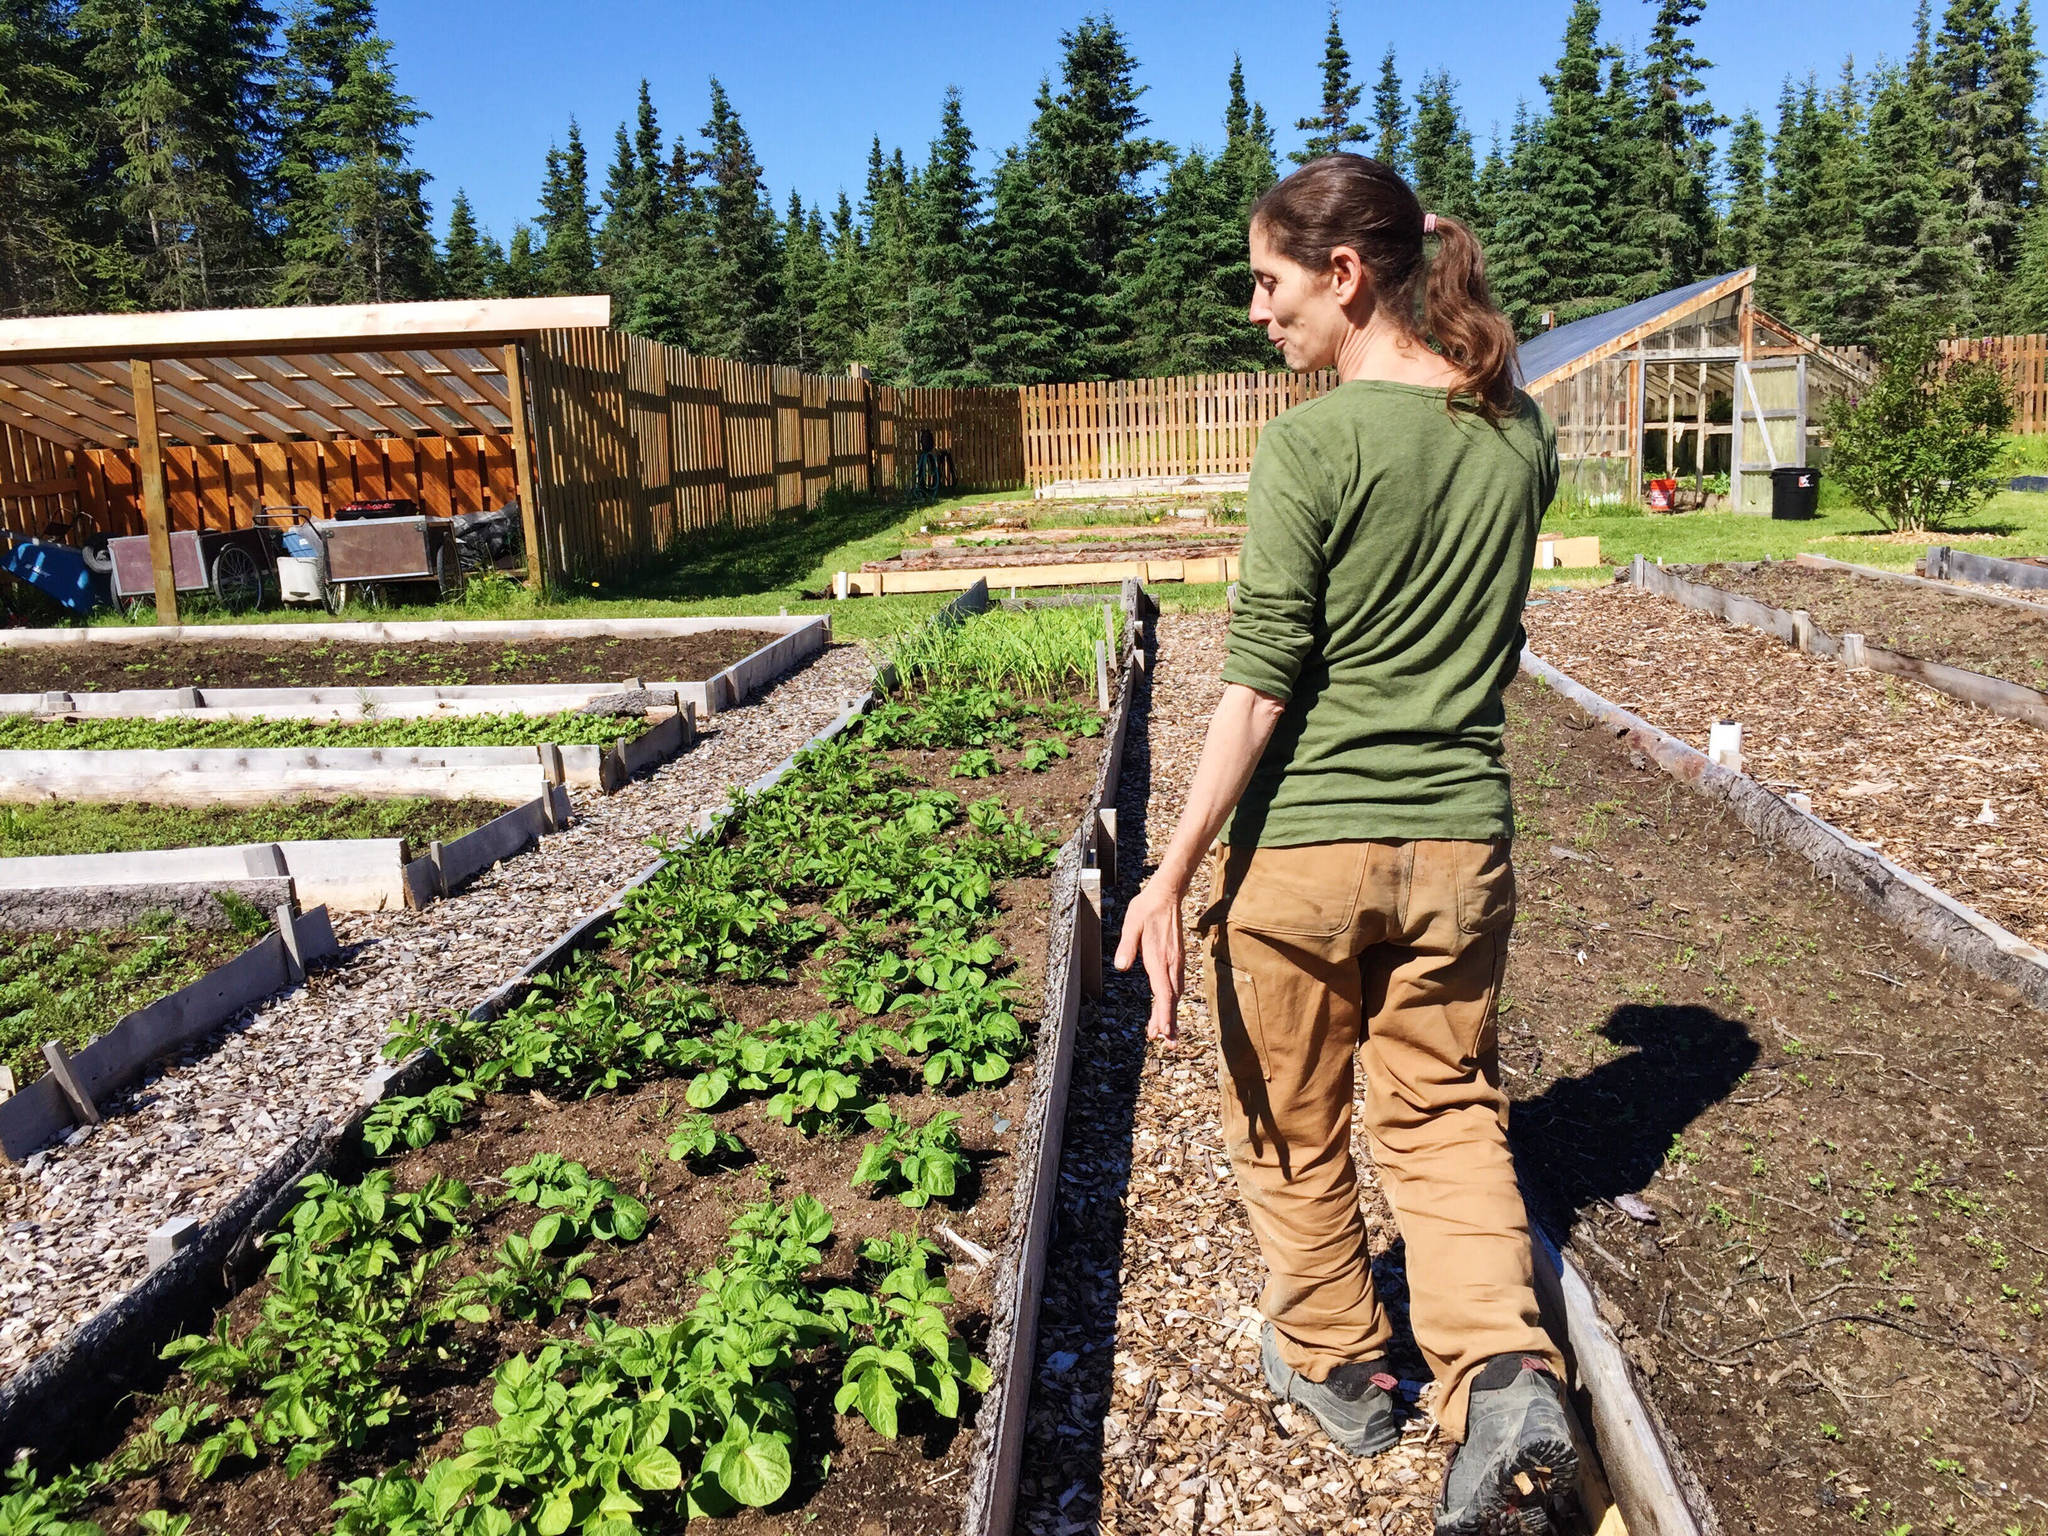 Eliza Eller walks through the garden in Ionia on Tuesday, July 3, near Kasilof, Alaska. Eller said that the garden provides much of the food for the community. (Photo by Victoria Petersen/Peninsula Clarion)